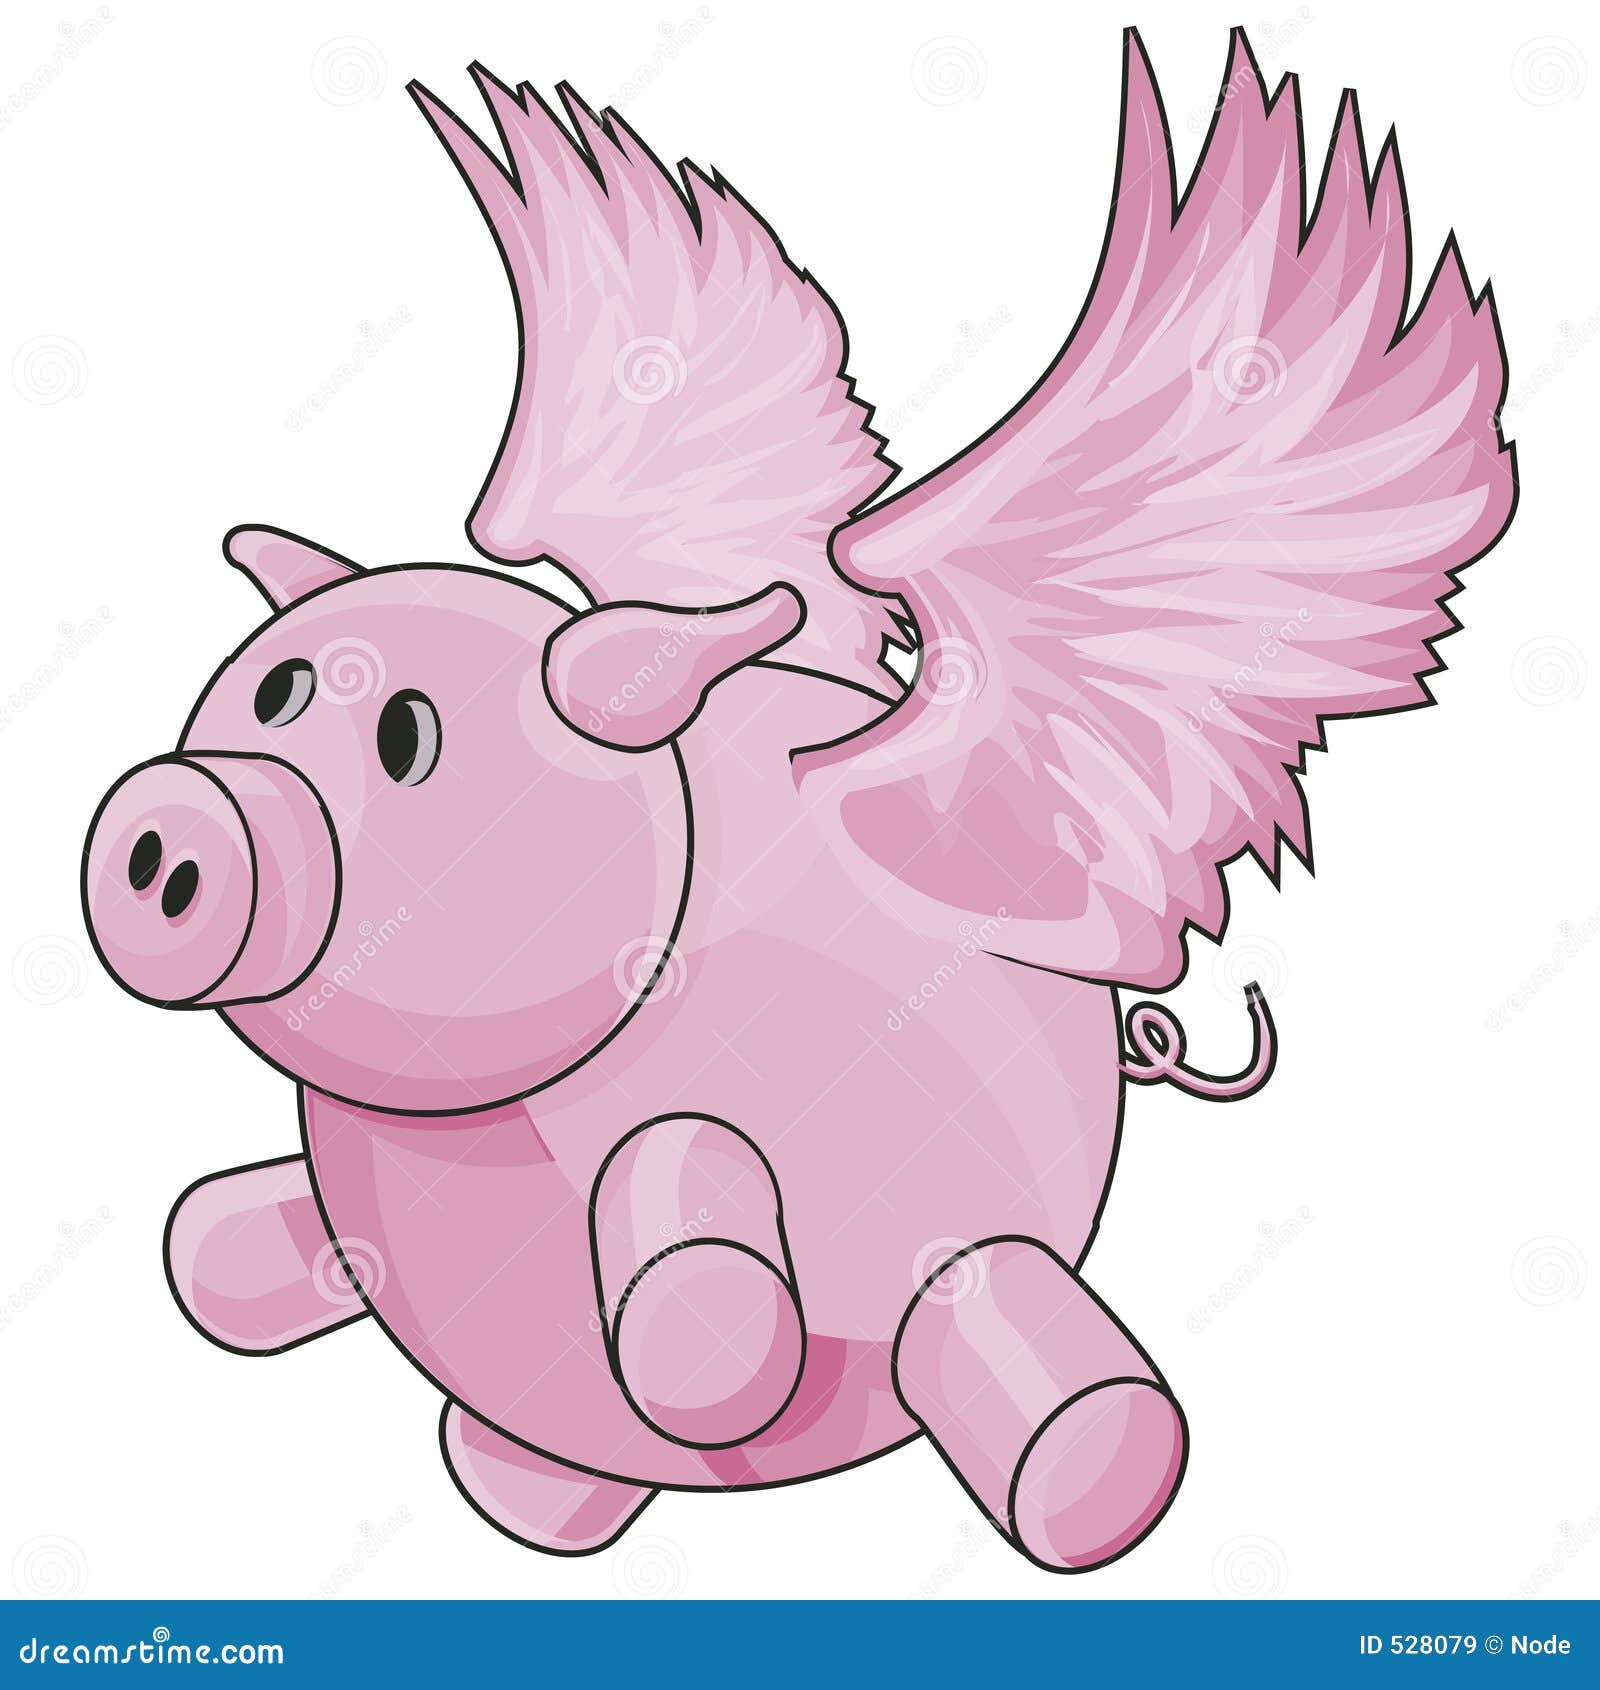 flying pig clipart - photo #34